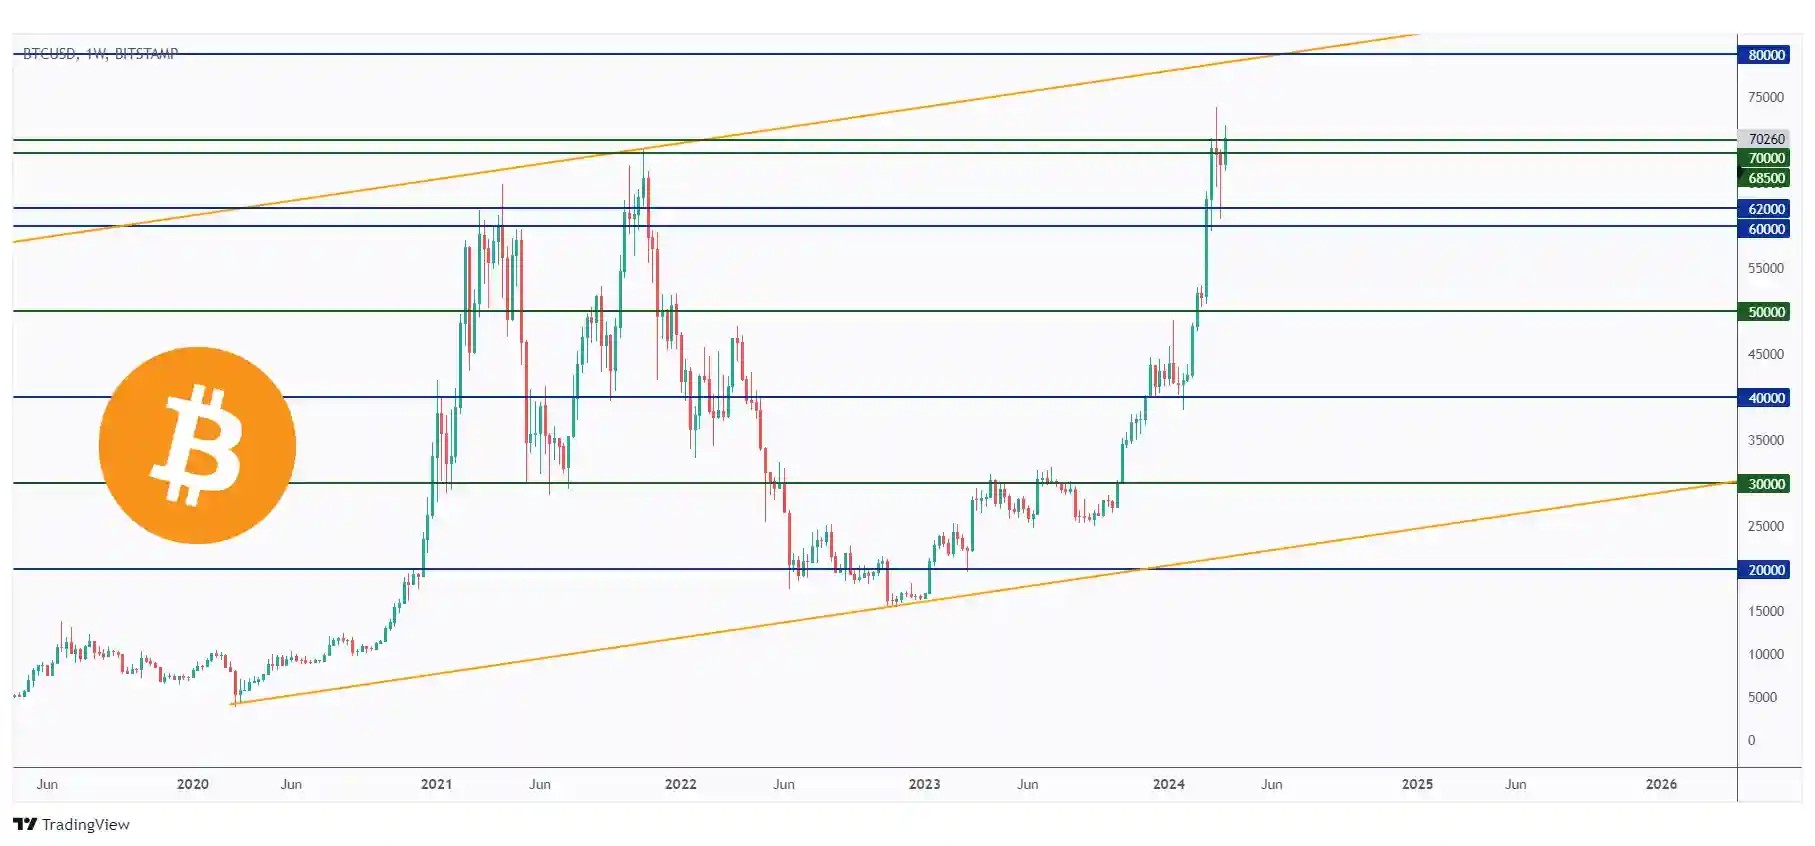 BTC weekly chart hovering around a massive resistance at $70,000.